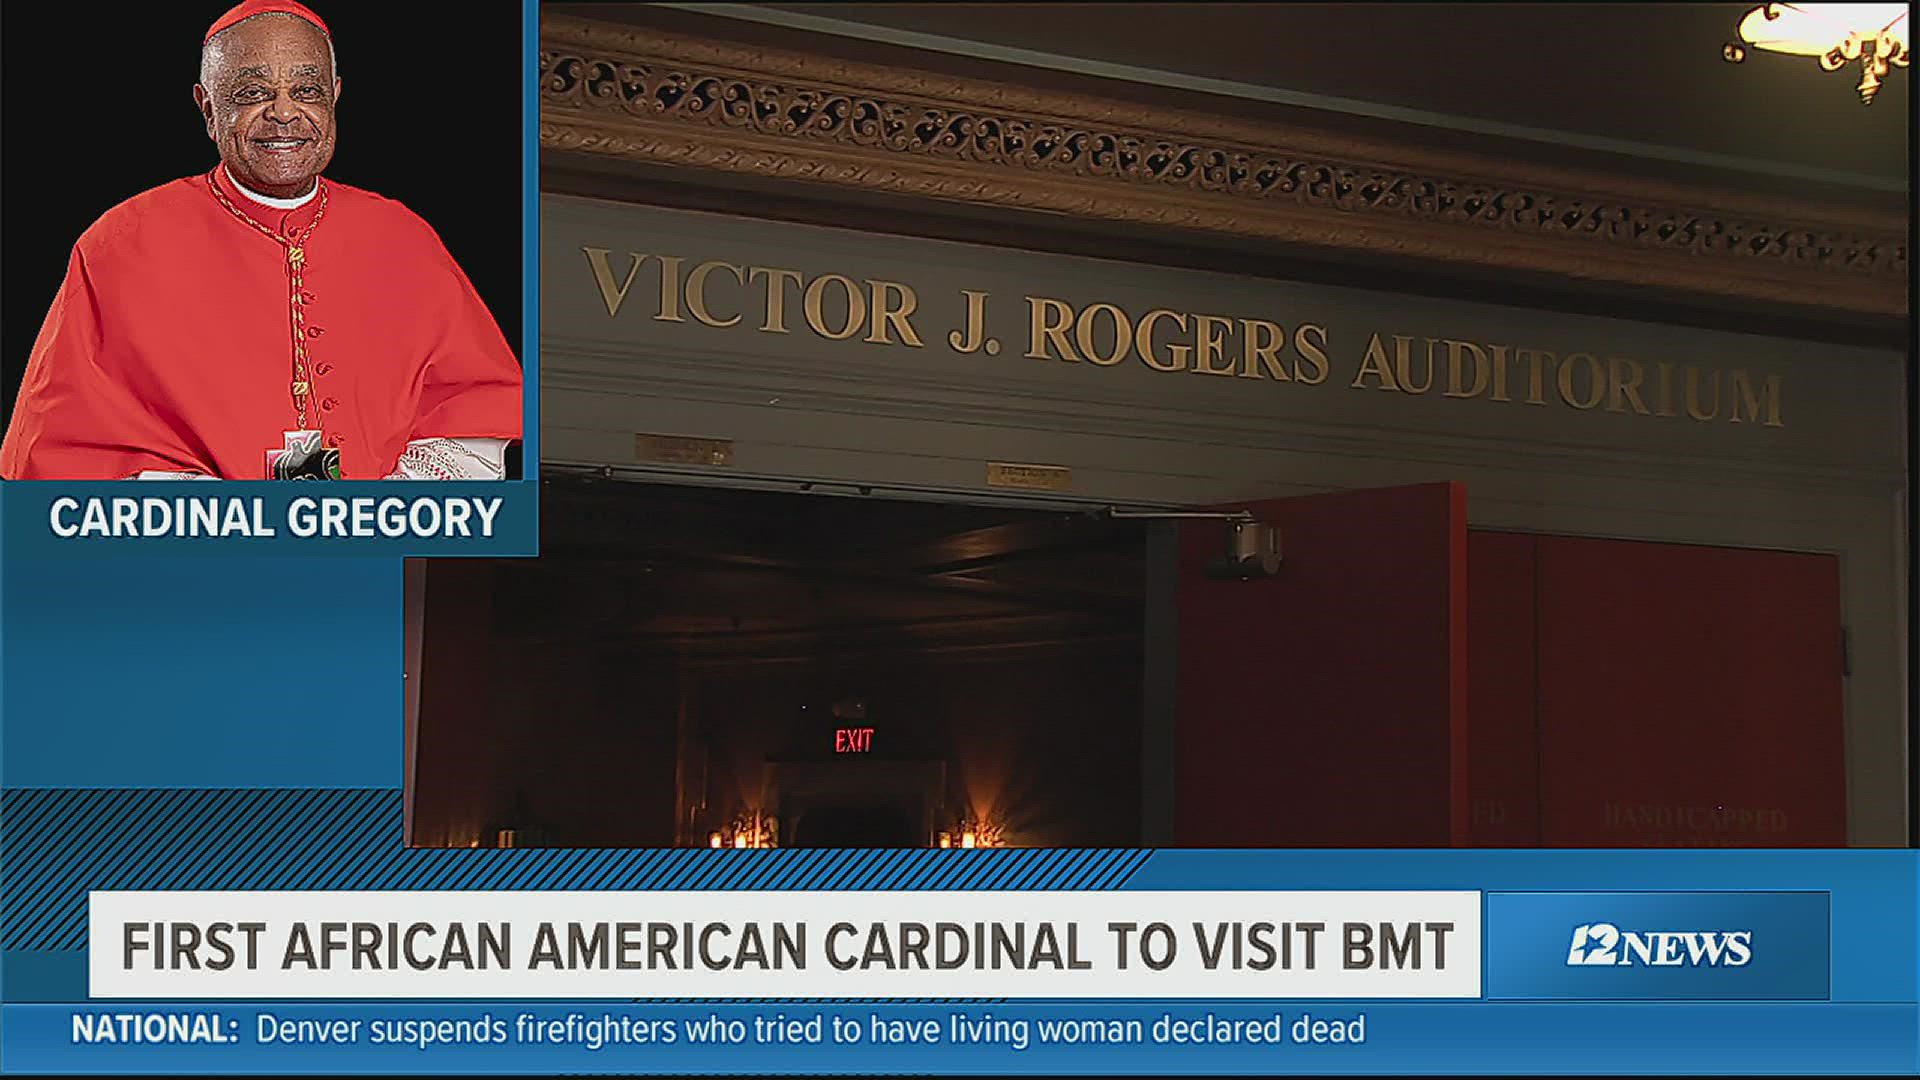 The first African American cardinal in the Catholic church will be in Beaumont for a summit to help promote healing and understanding on Saturday.